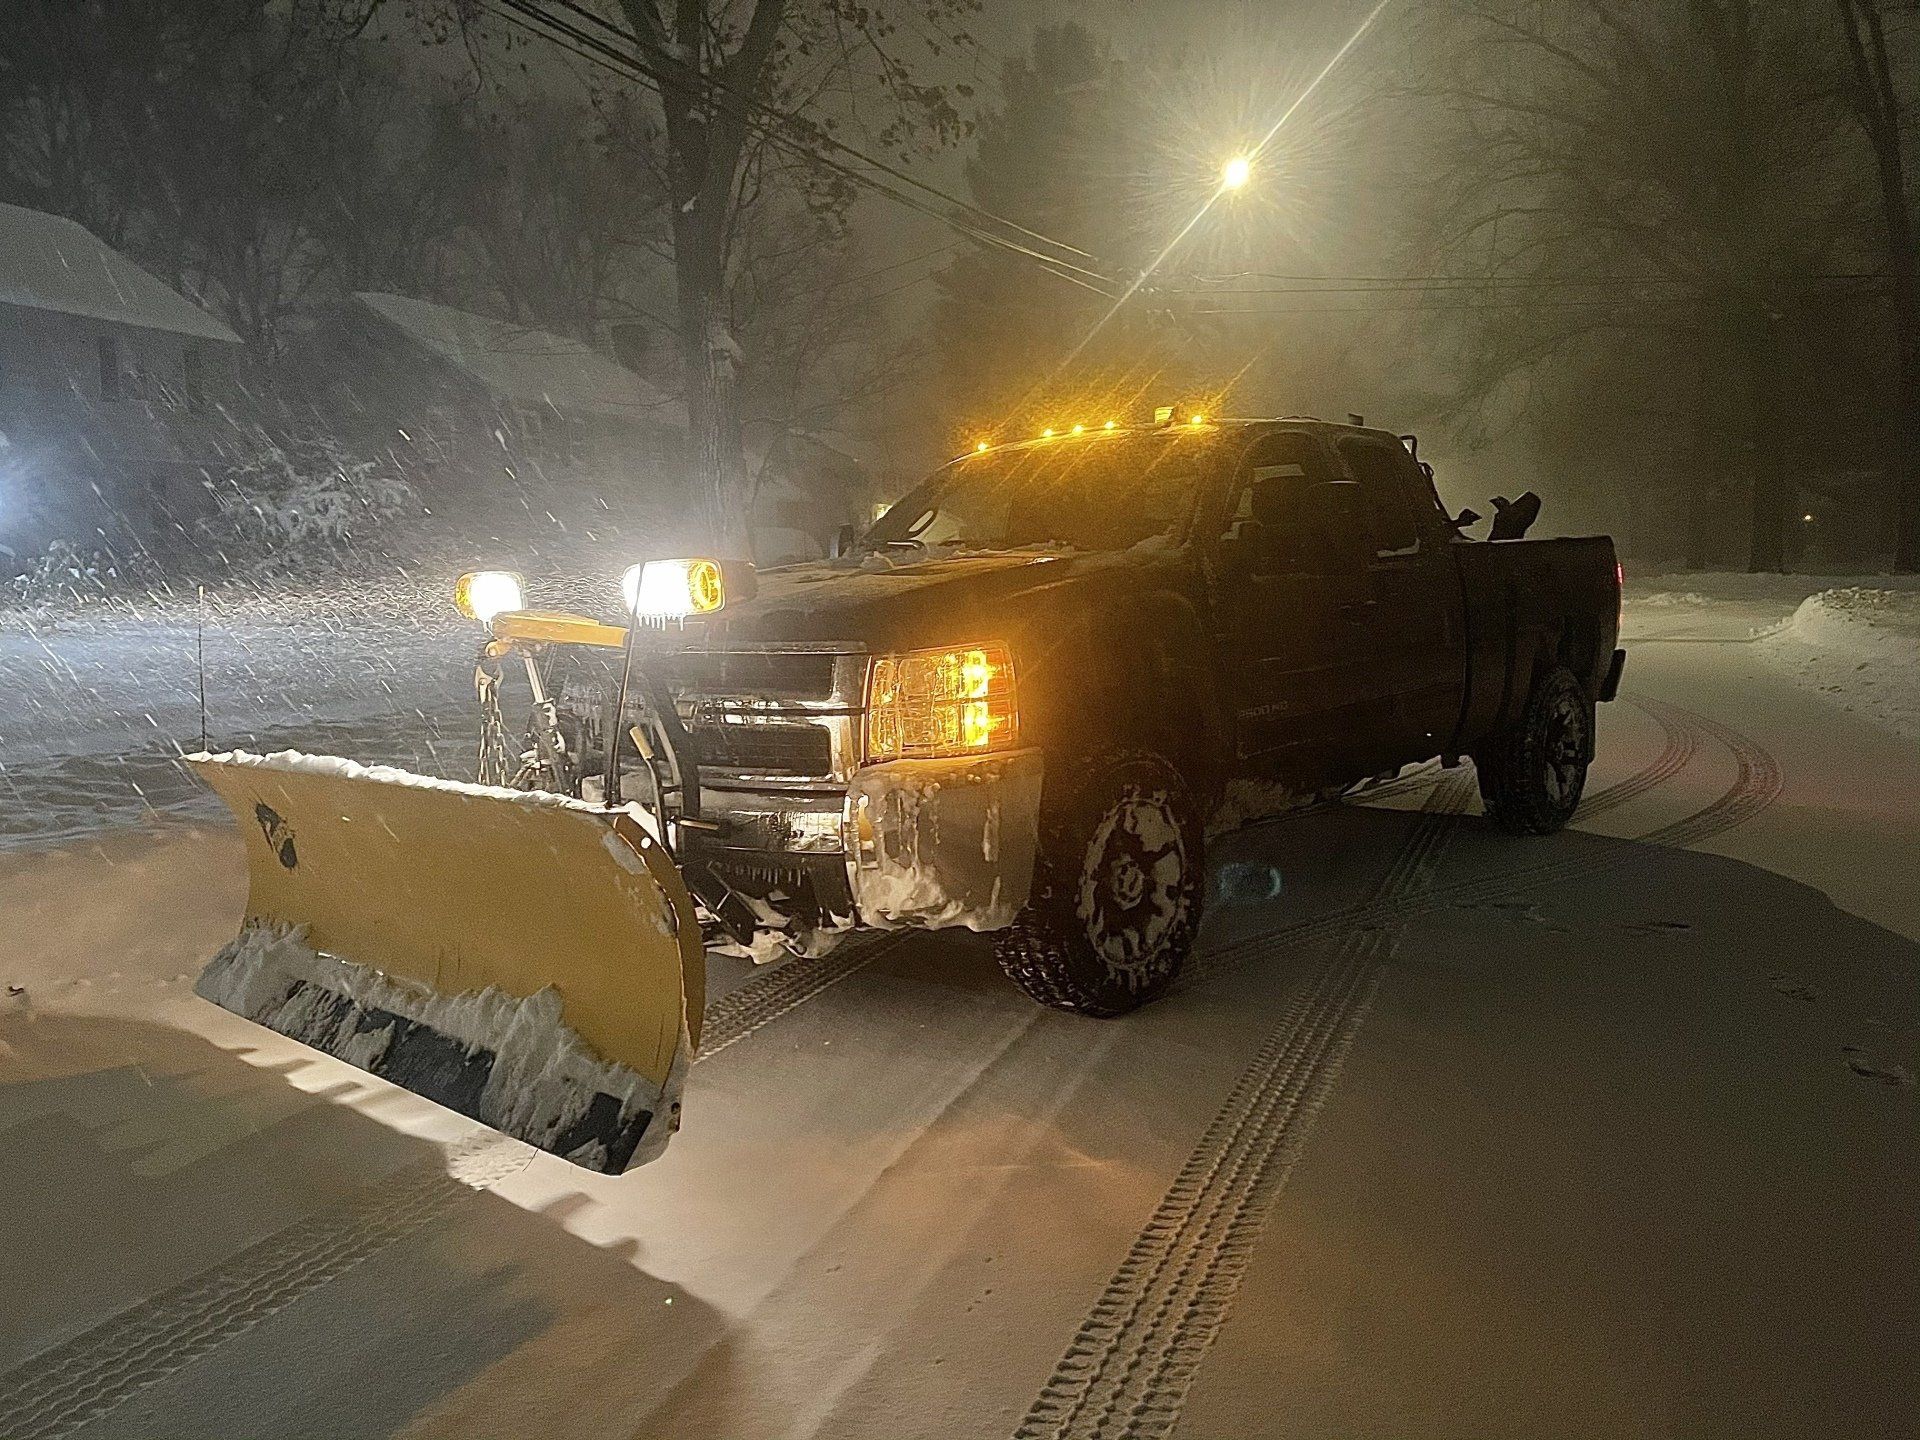 Chevy Plow Truck Servicing West Hartford, CT during Snow Storm